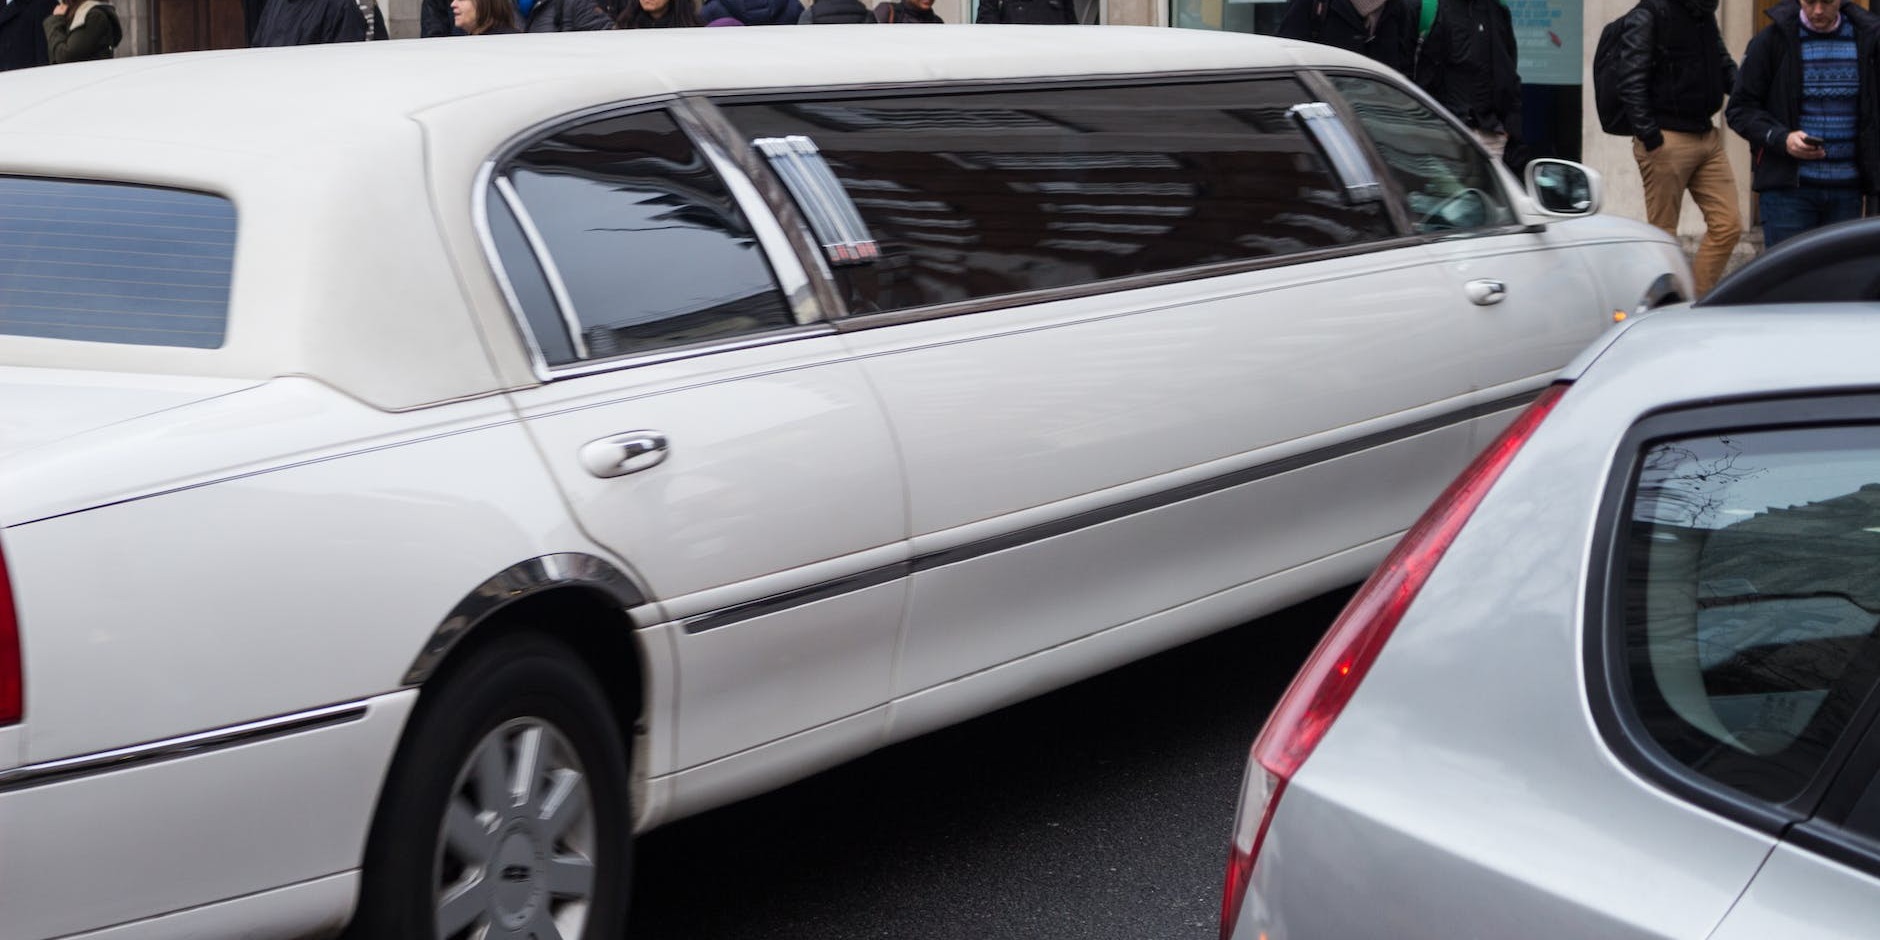 Top Tips for Hiring a Limo in Talbot Green and Mid Glamorgan Without Breaking the Bank